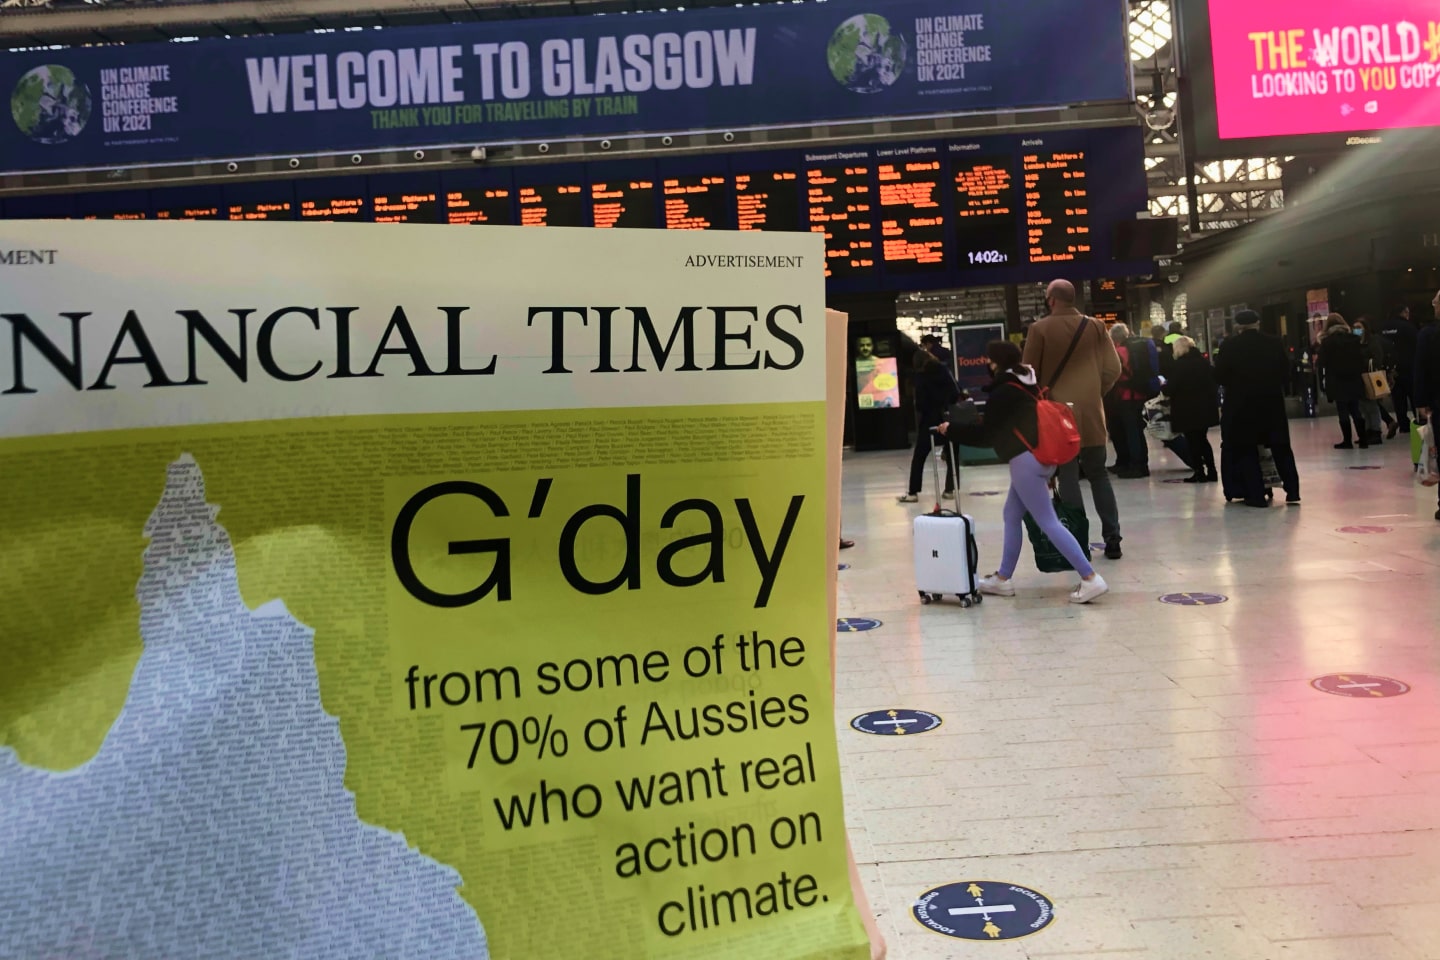 Glasgow Airport with a person holding a copy of the Financial Times newspaper whose headline is about how Australians want climate action